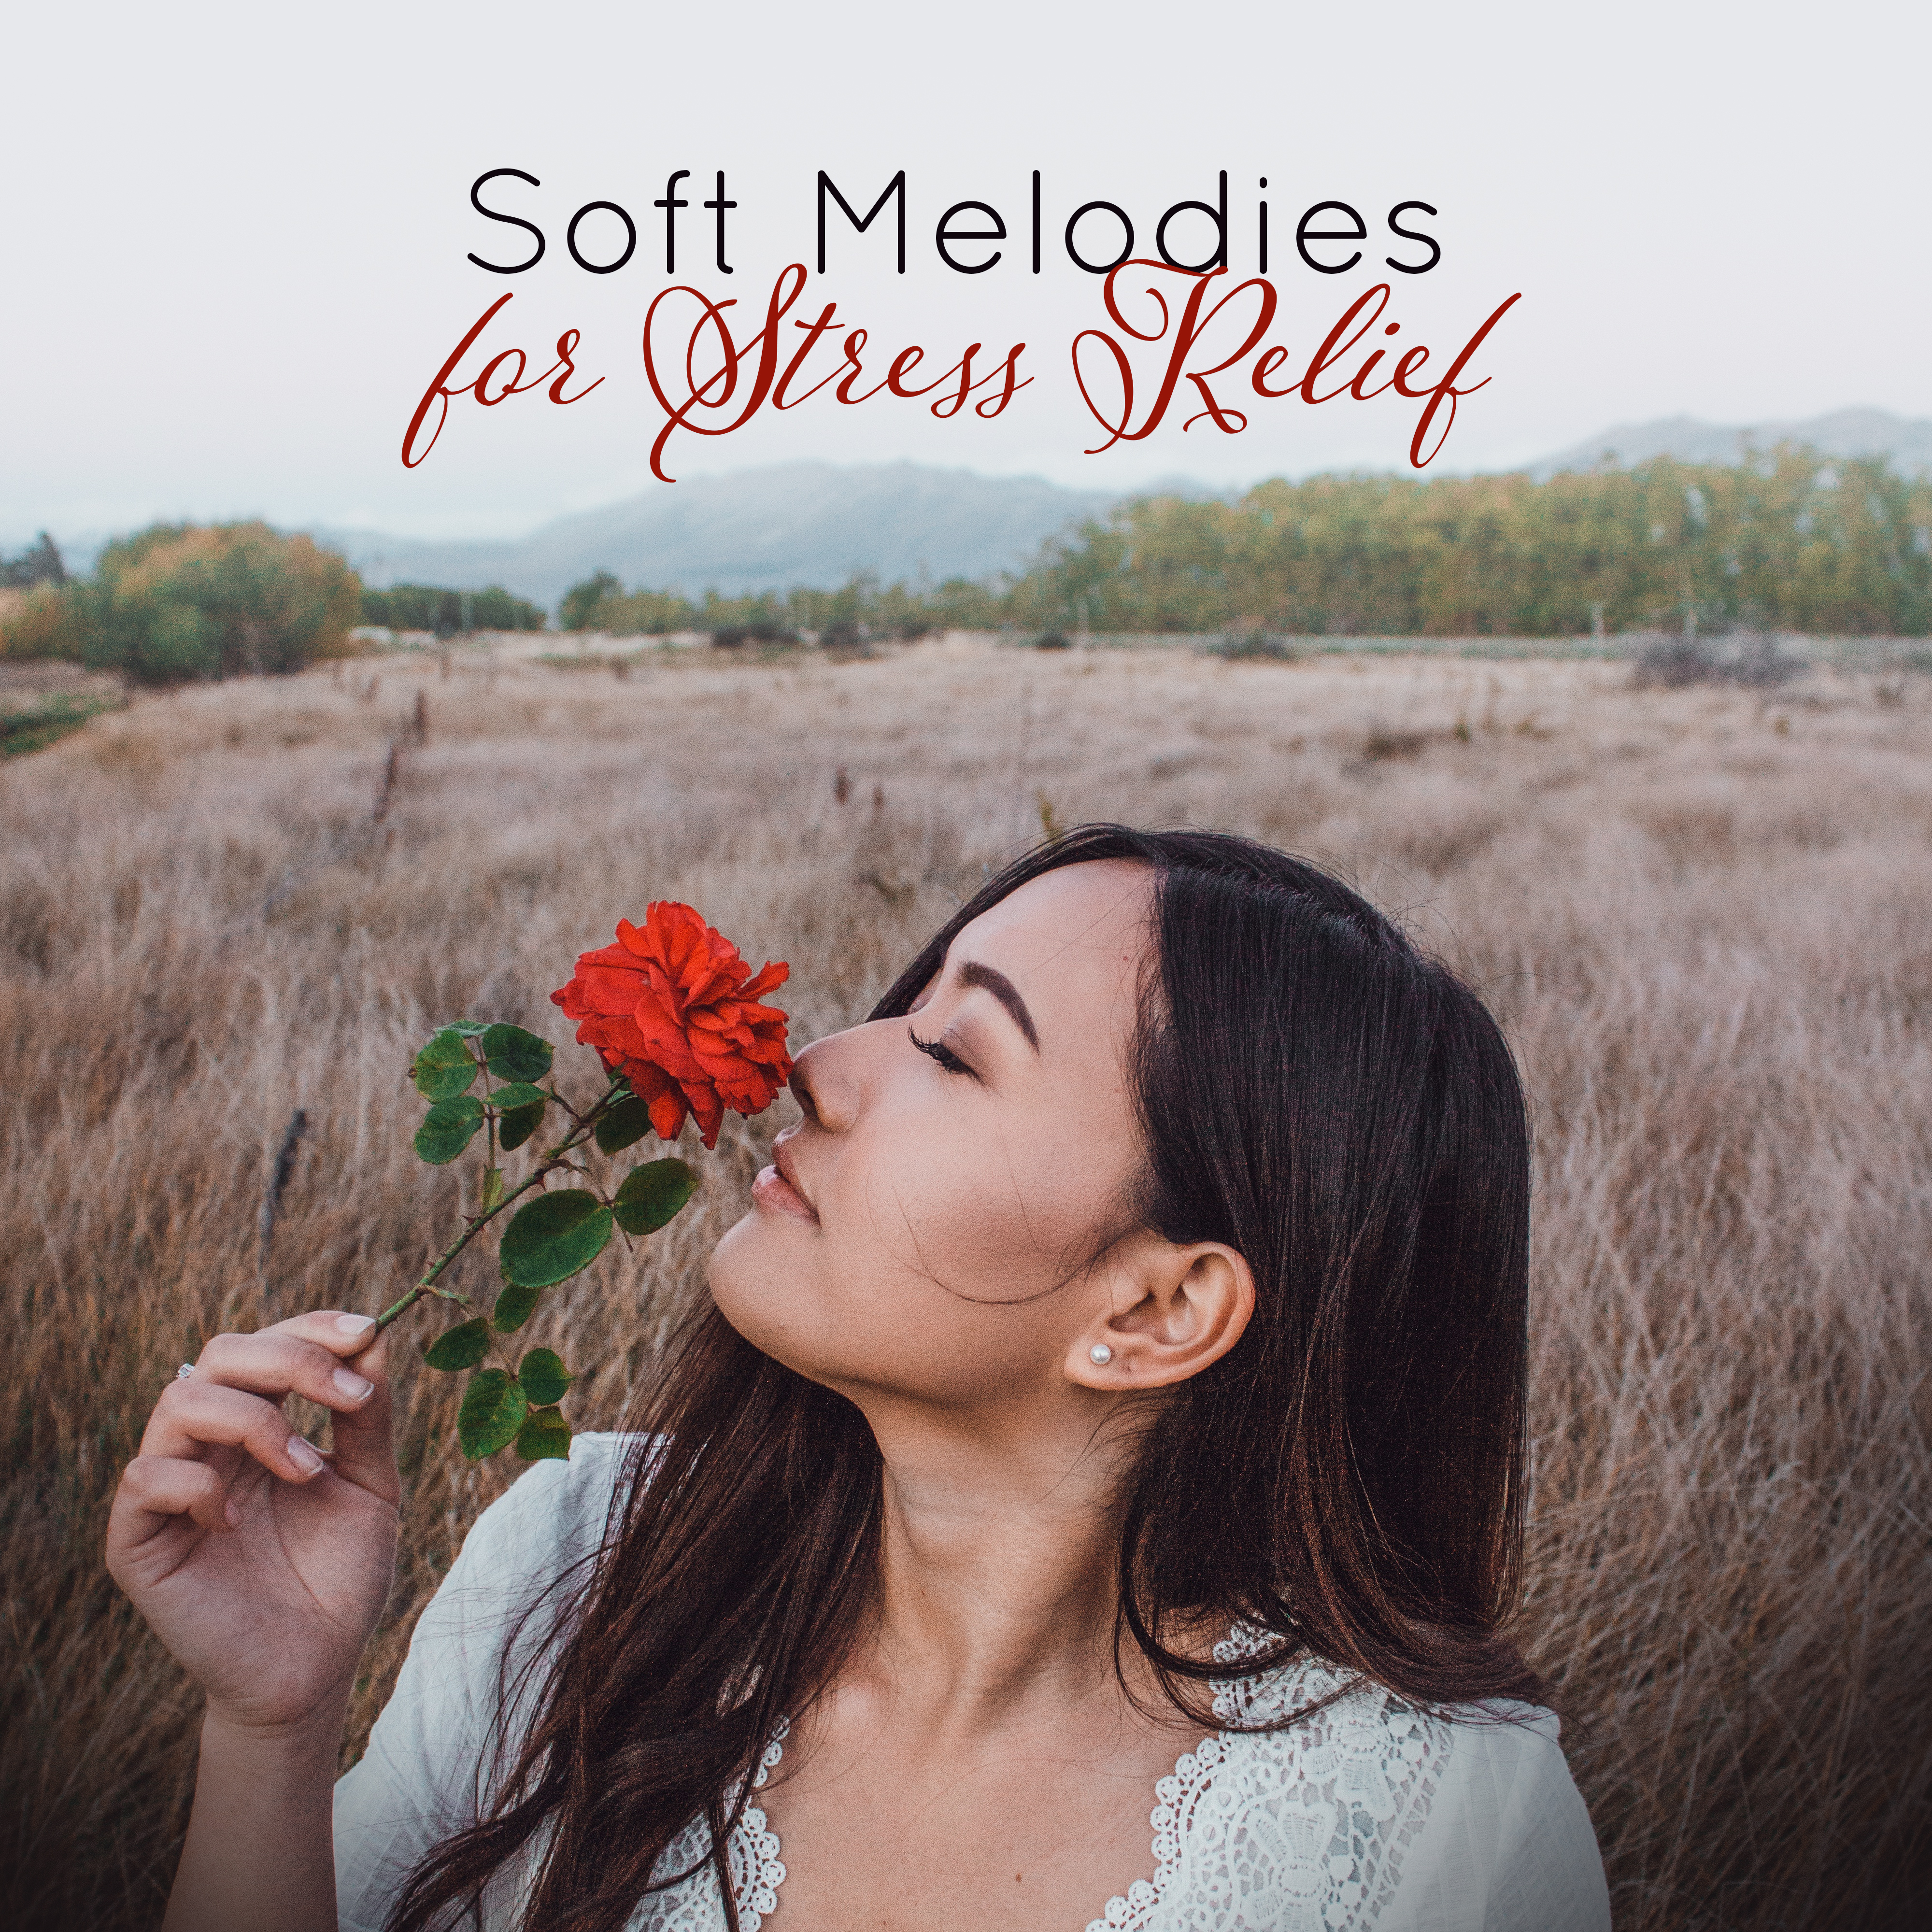 Soft Melodies for Stress Relief